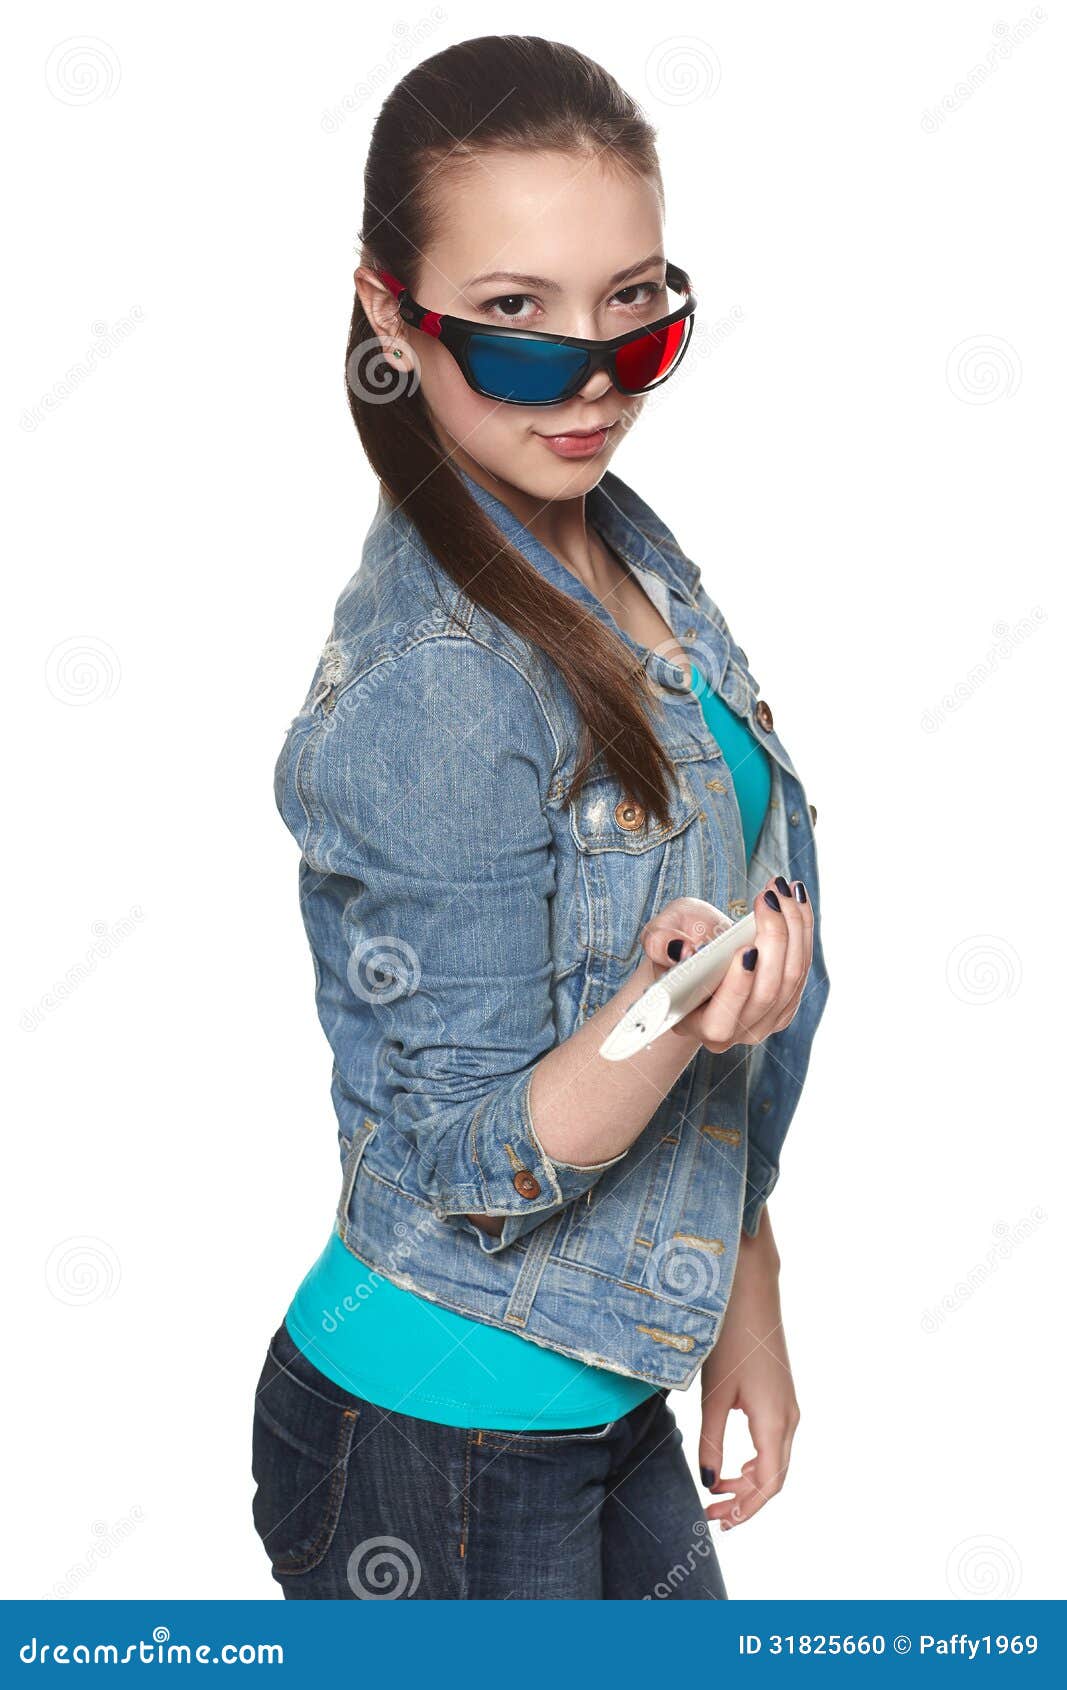 3D movie stock photo picture